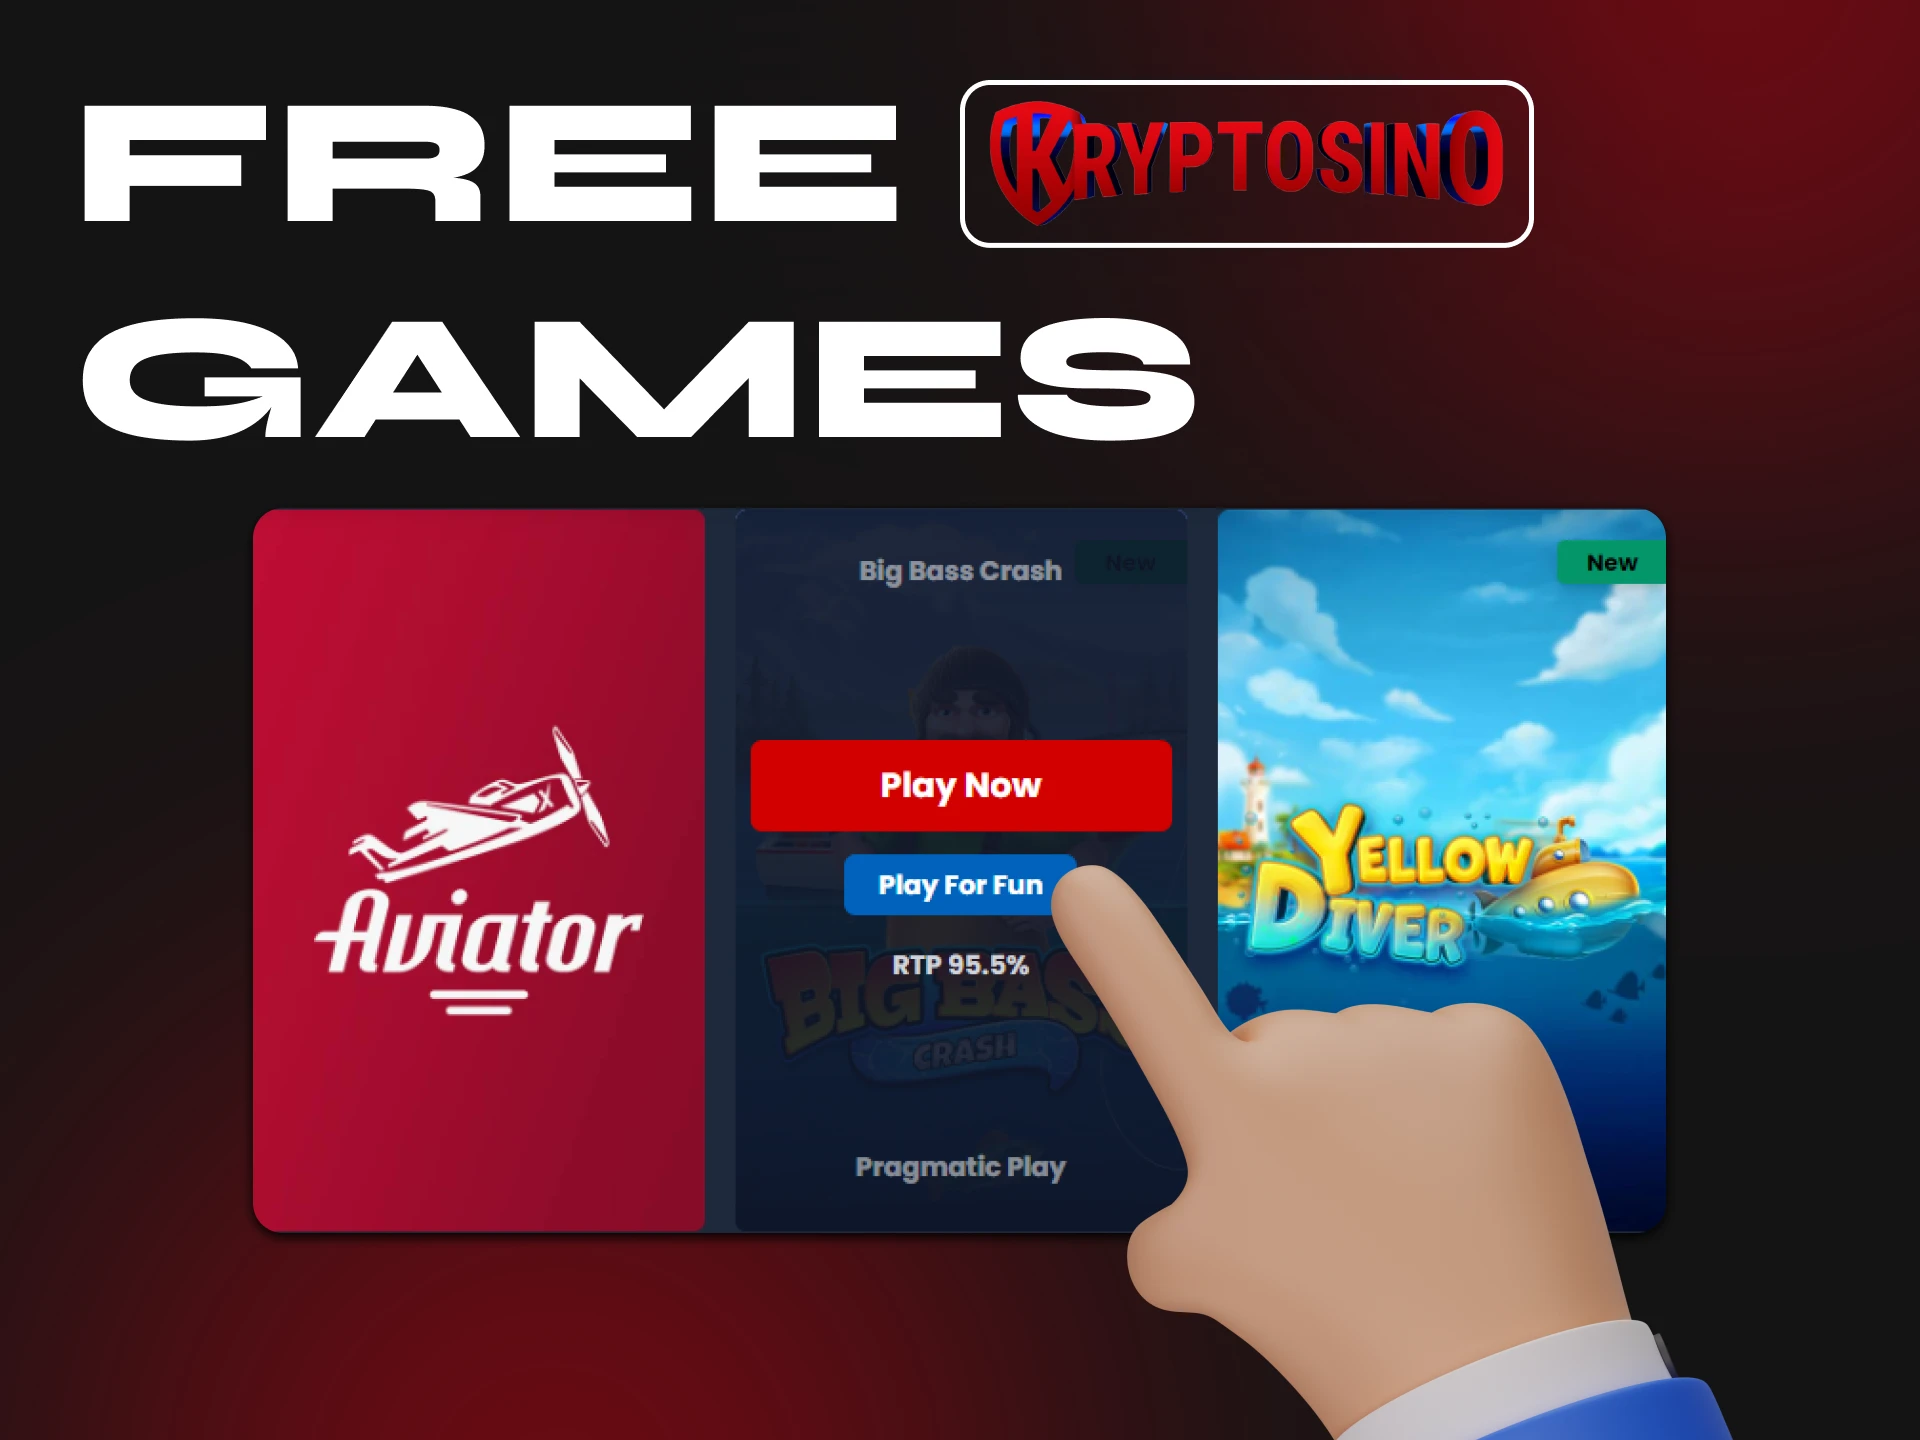 At Kryptosino you can play casino games for free.